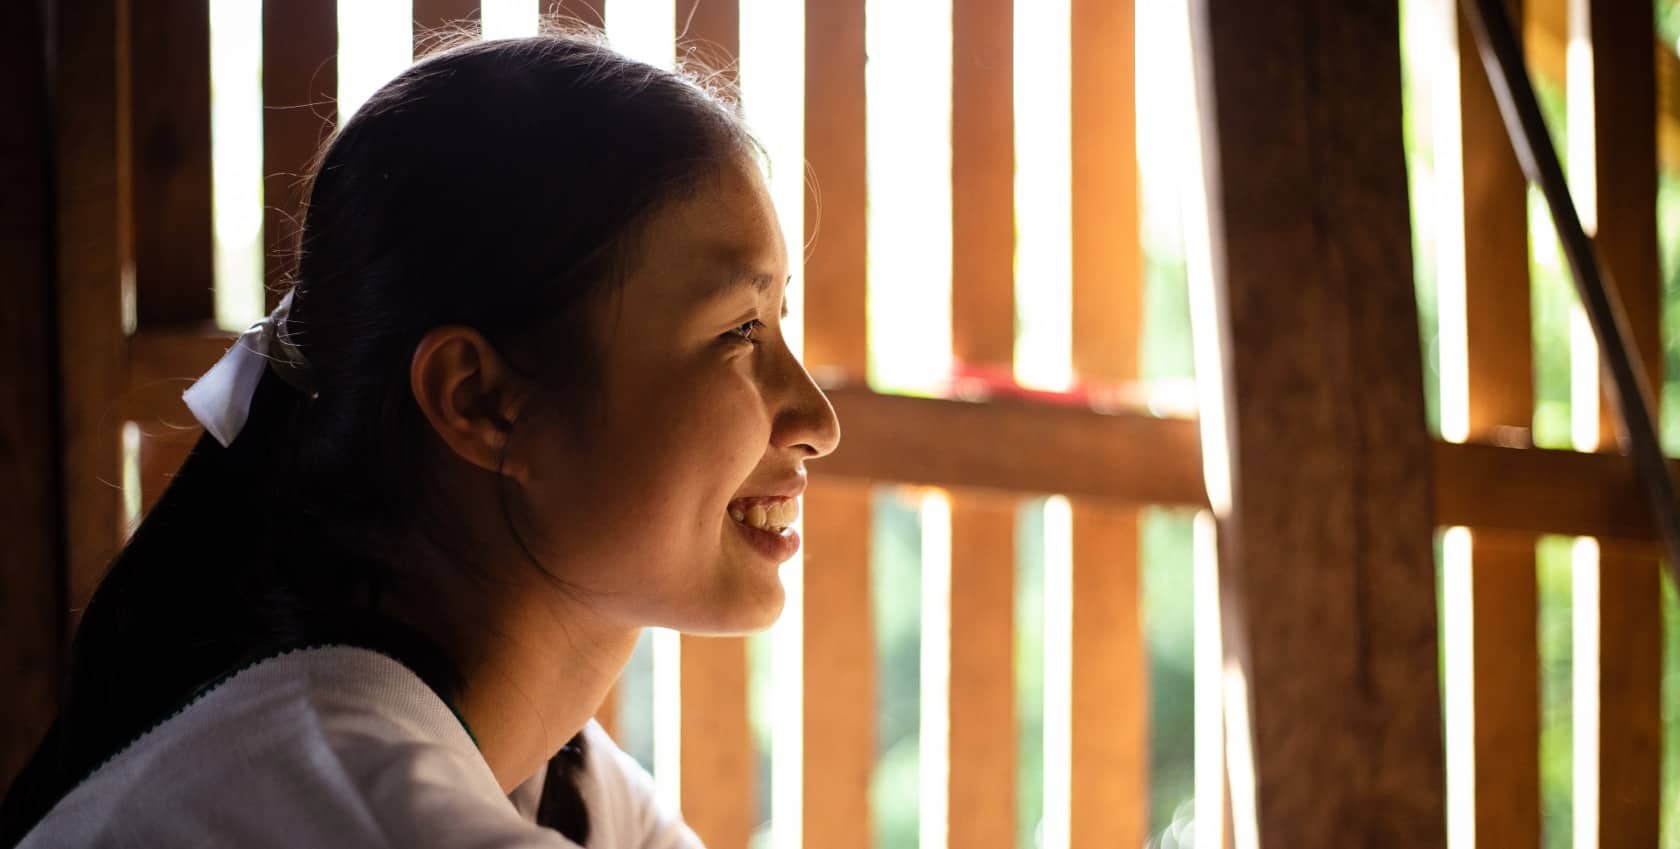 A thai young lady smiling confidently